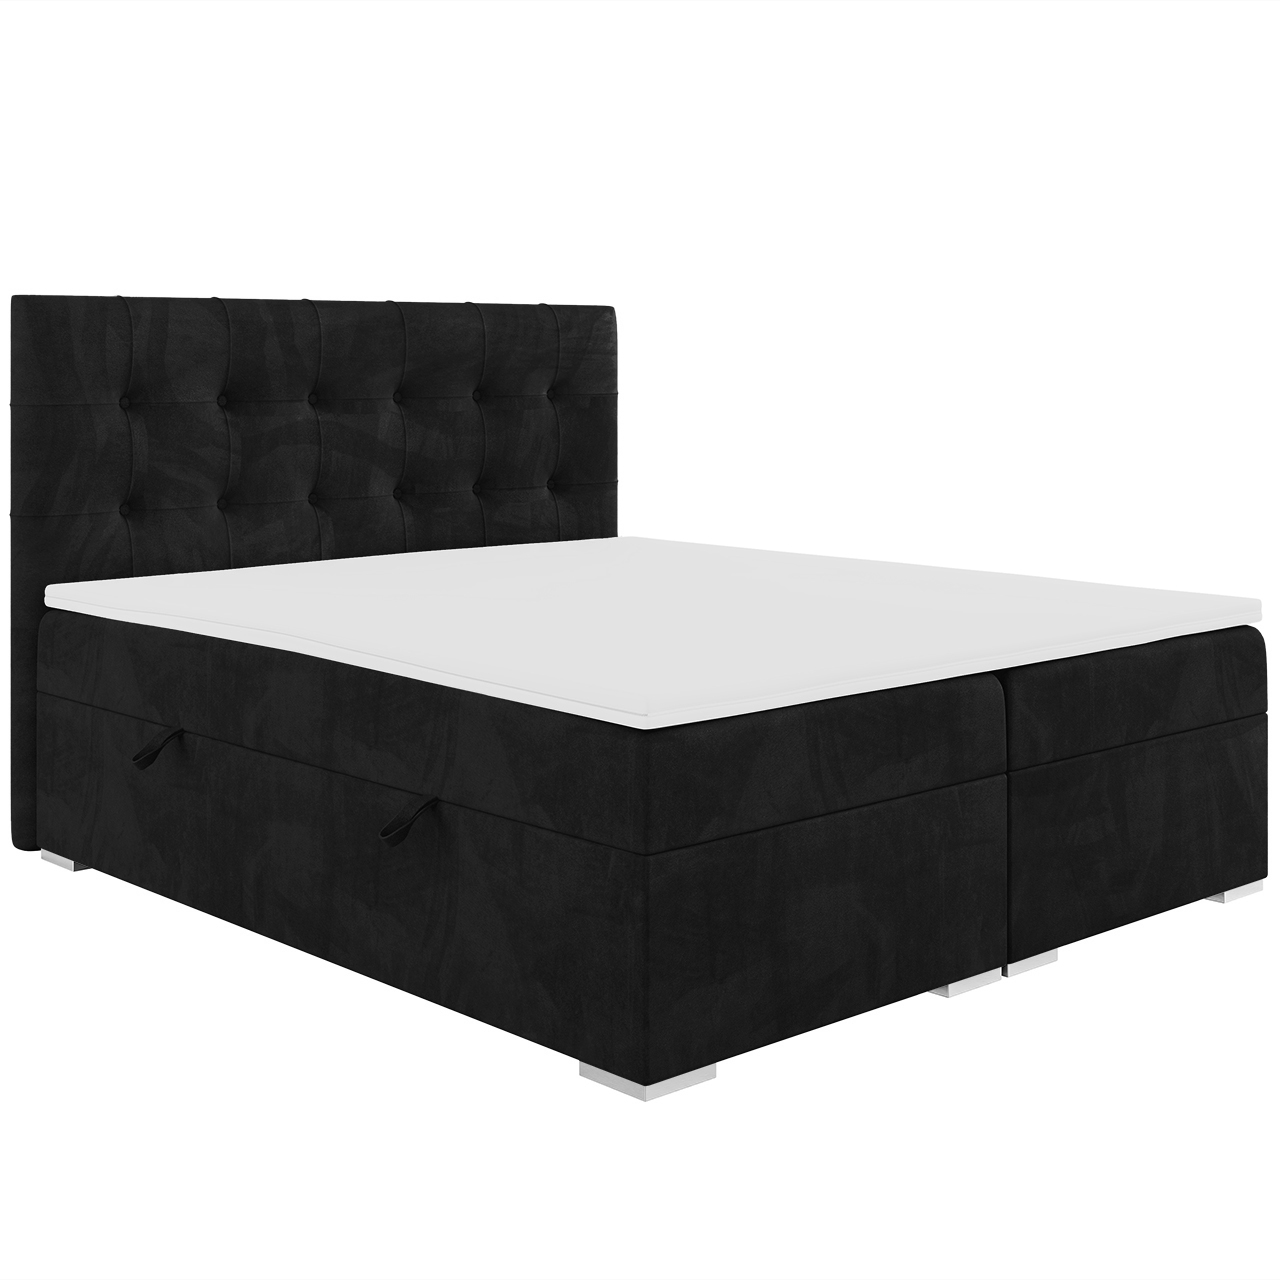 Upholstered bed CARLO 180x200 riviera 100